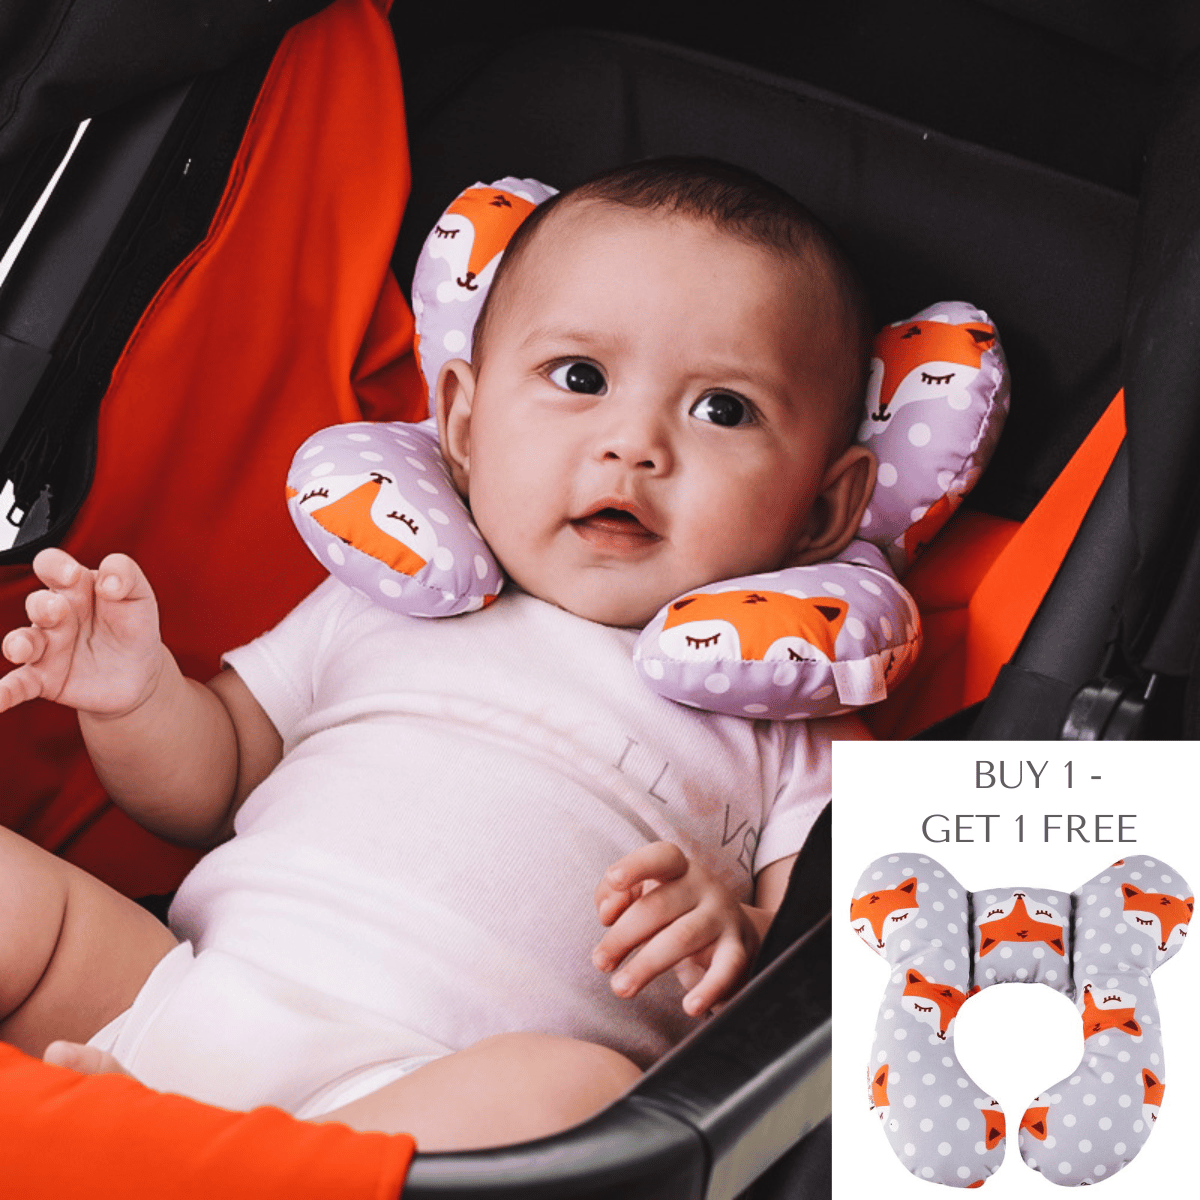 Lina Baby Support Pillow - ? Buy 1 Get 1 Free